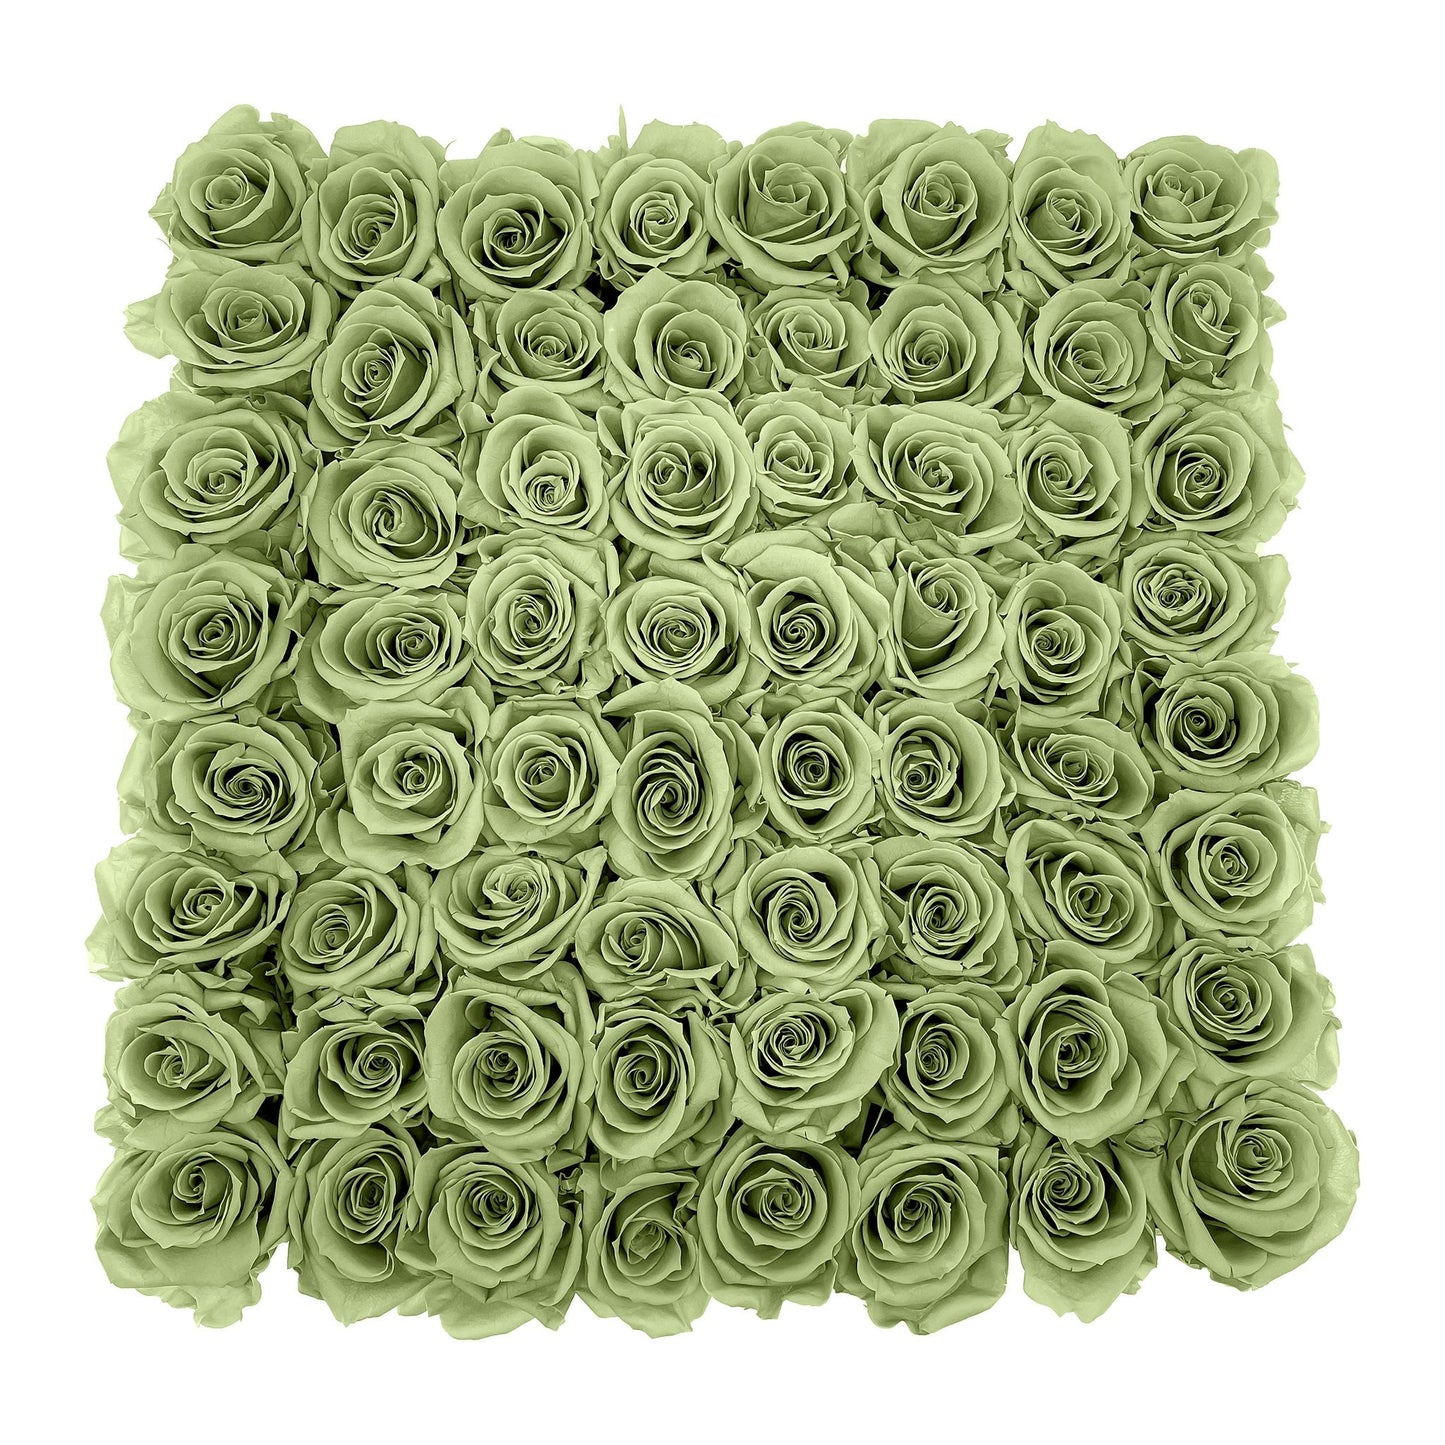 Preserved Roses Large Box | Green - Floral_Arrangement - Flower Delivery NYC